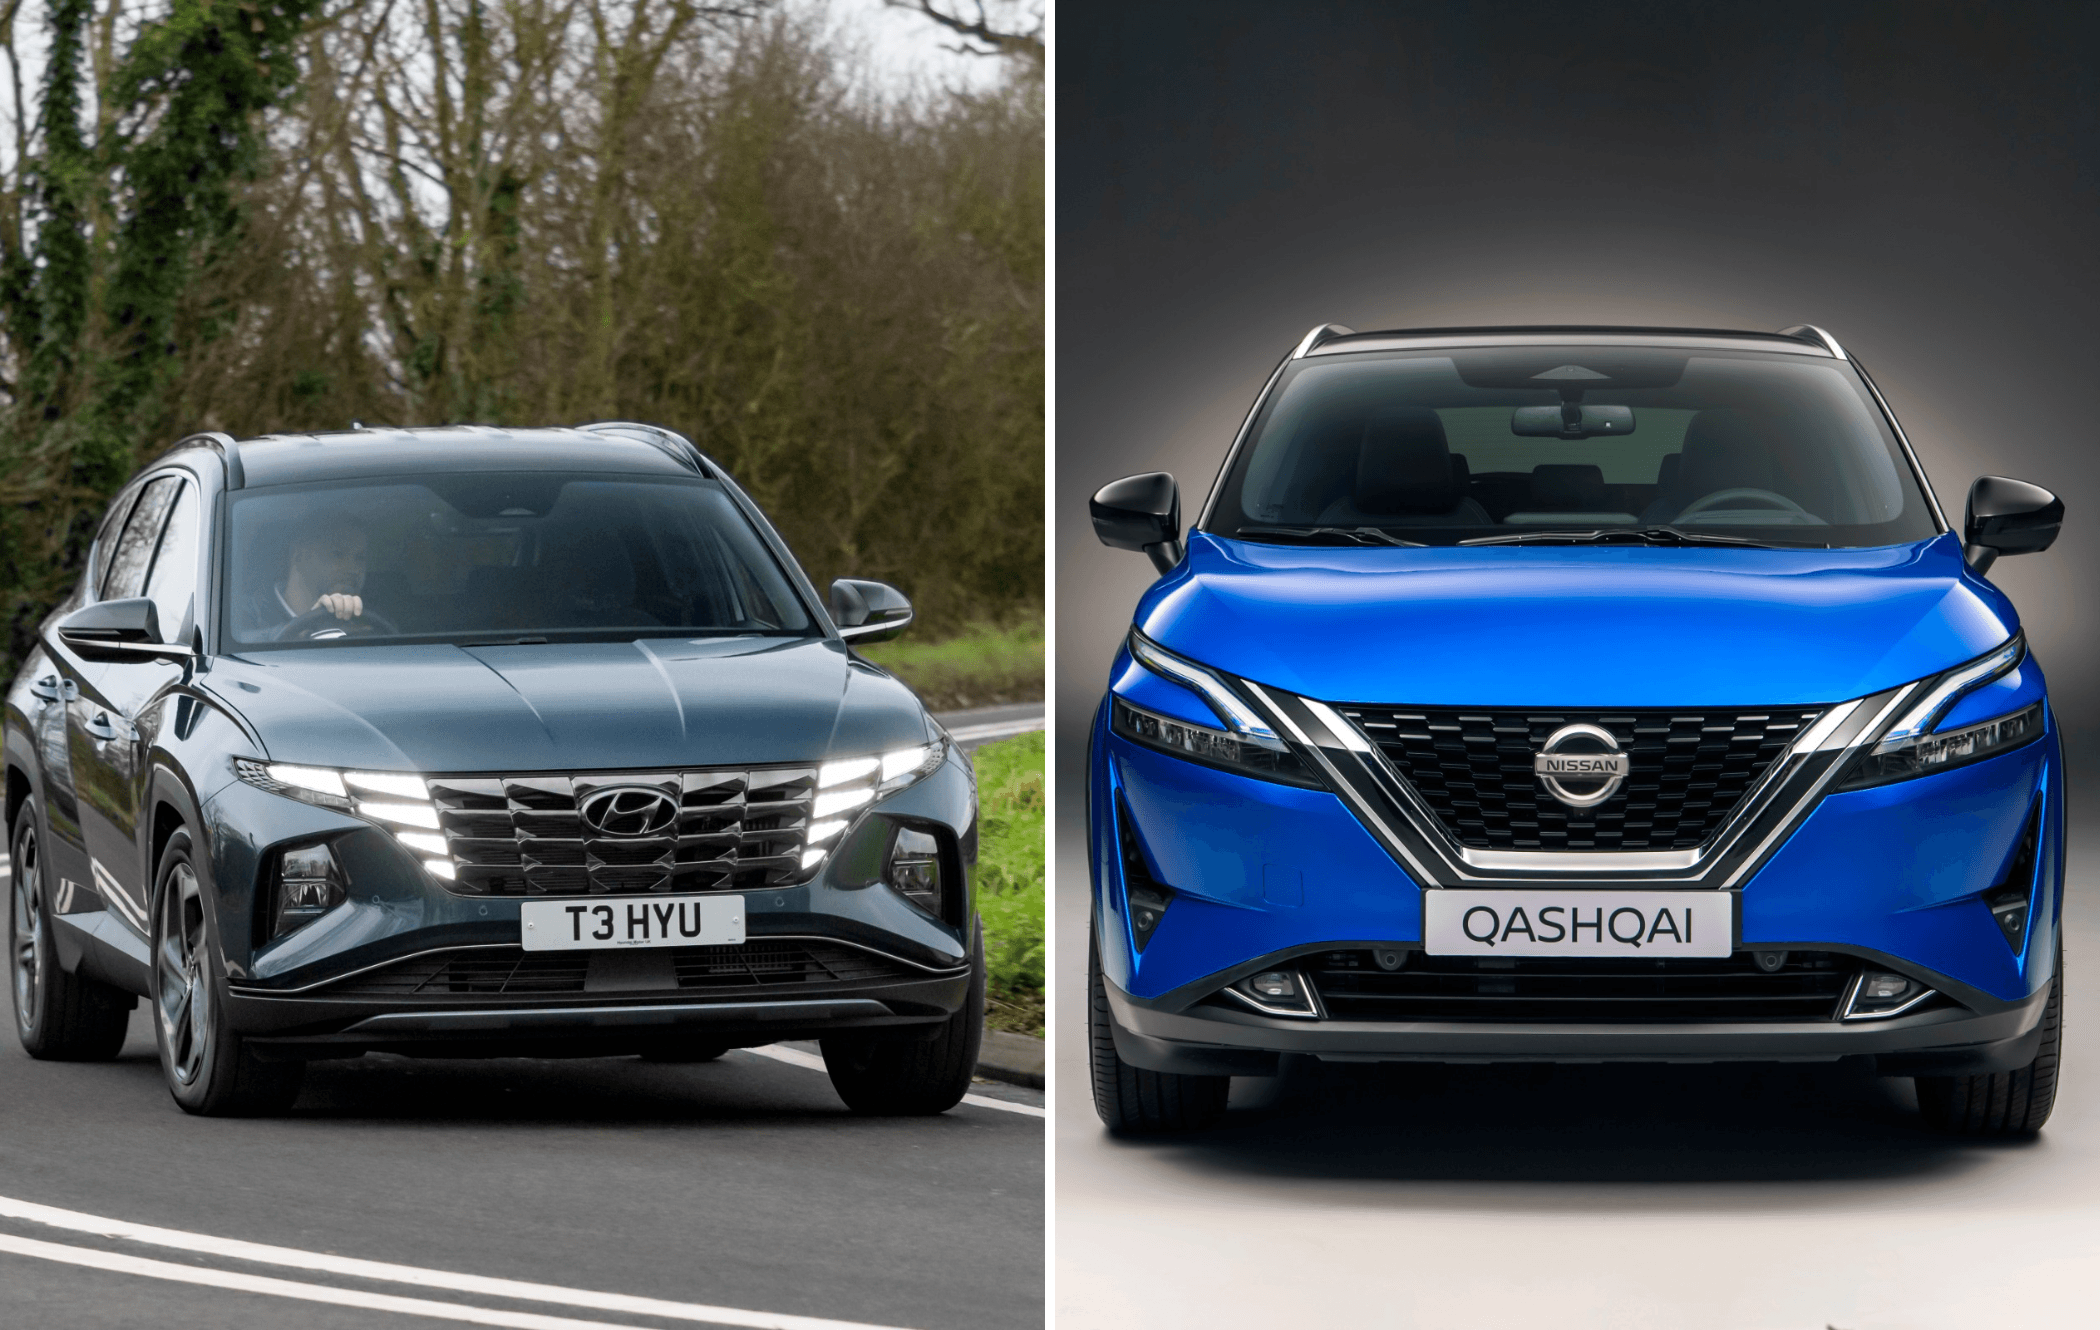 on the left is a grey hyundai tucson driving on a road and on the right is a blue nissan qashqai front